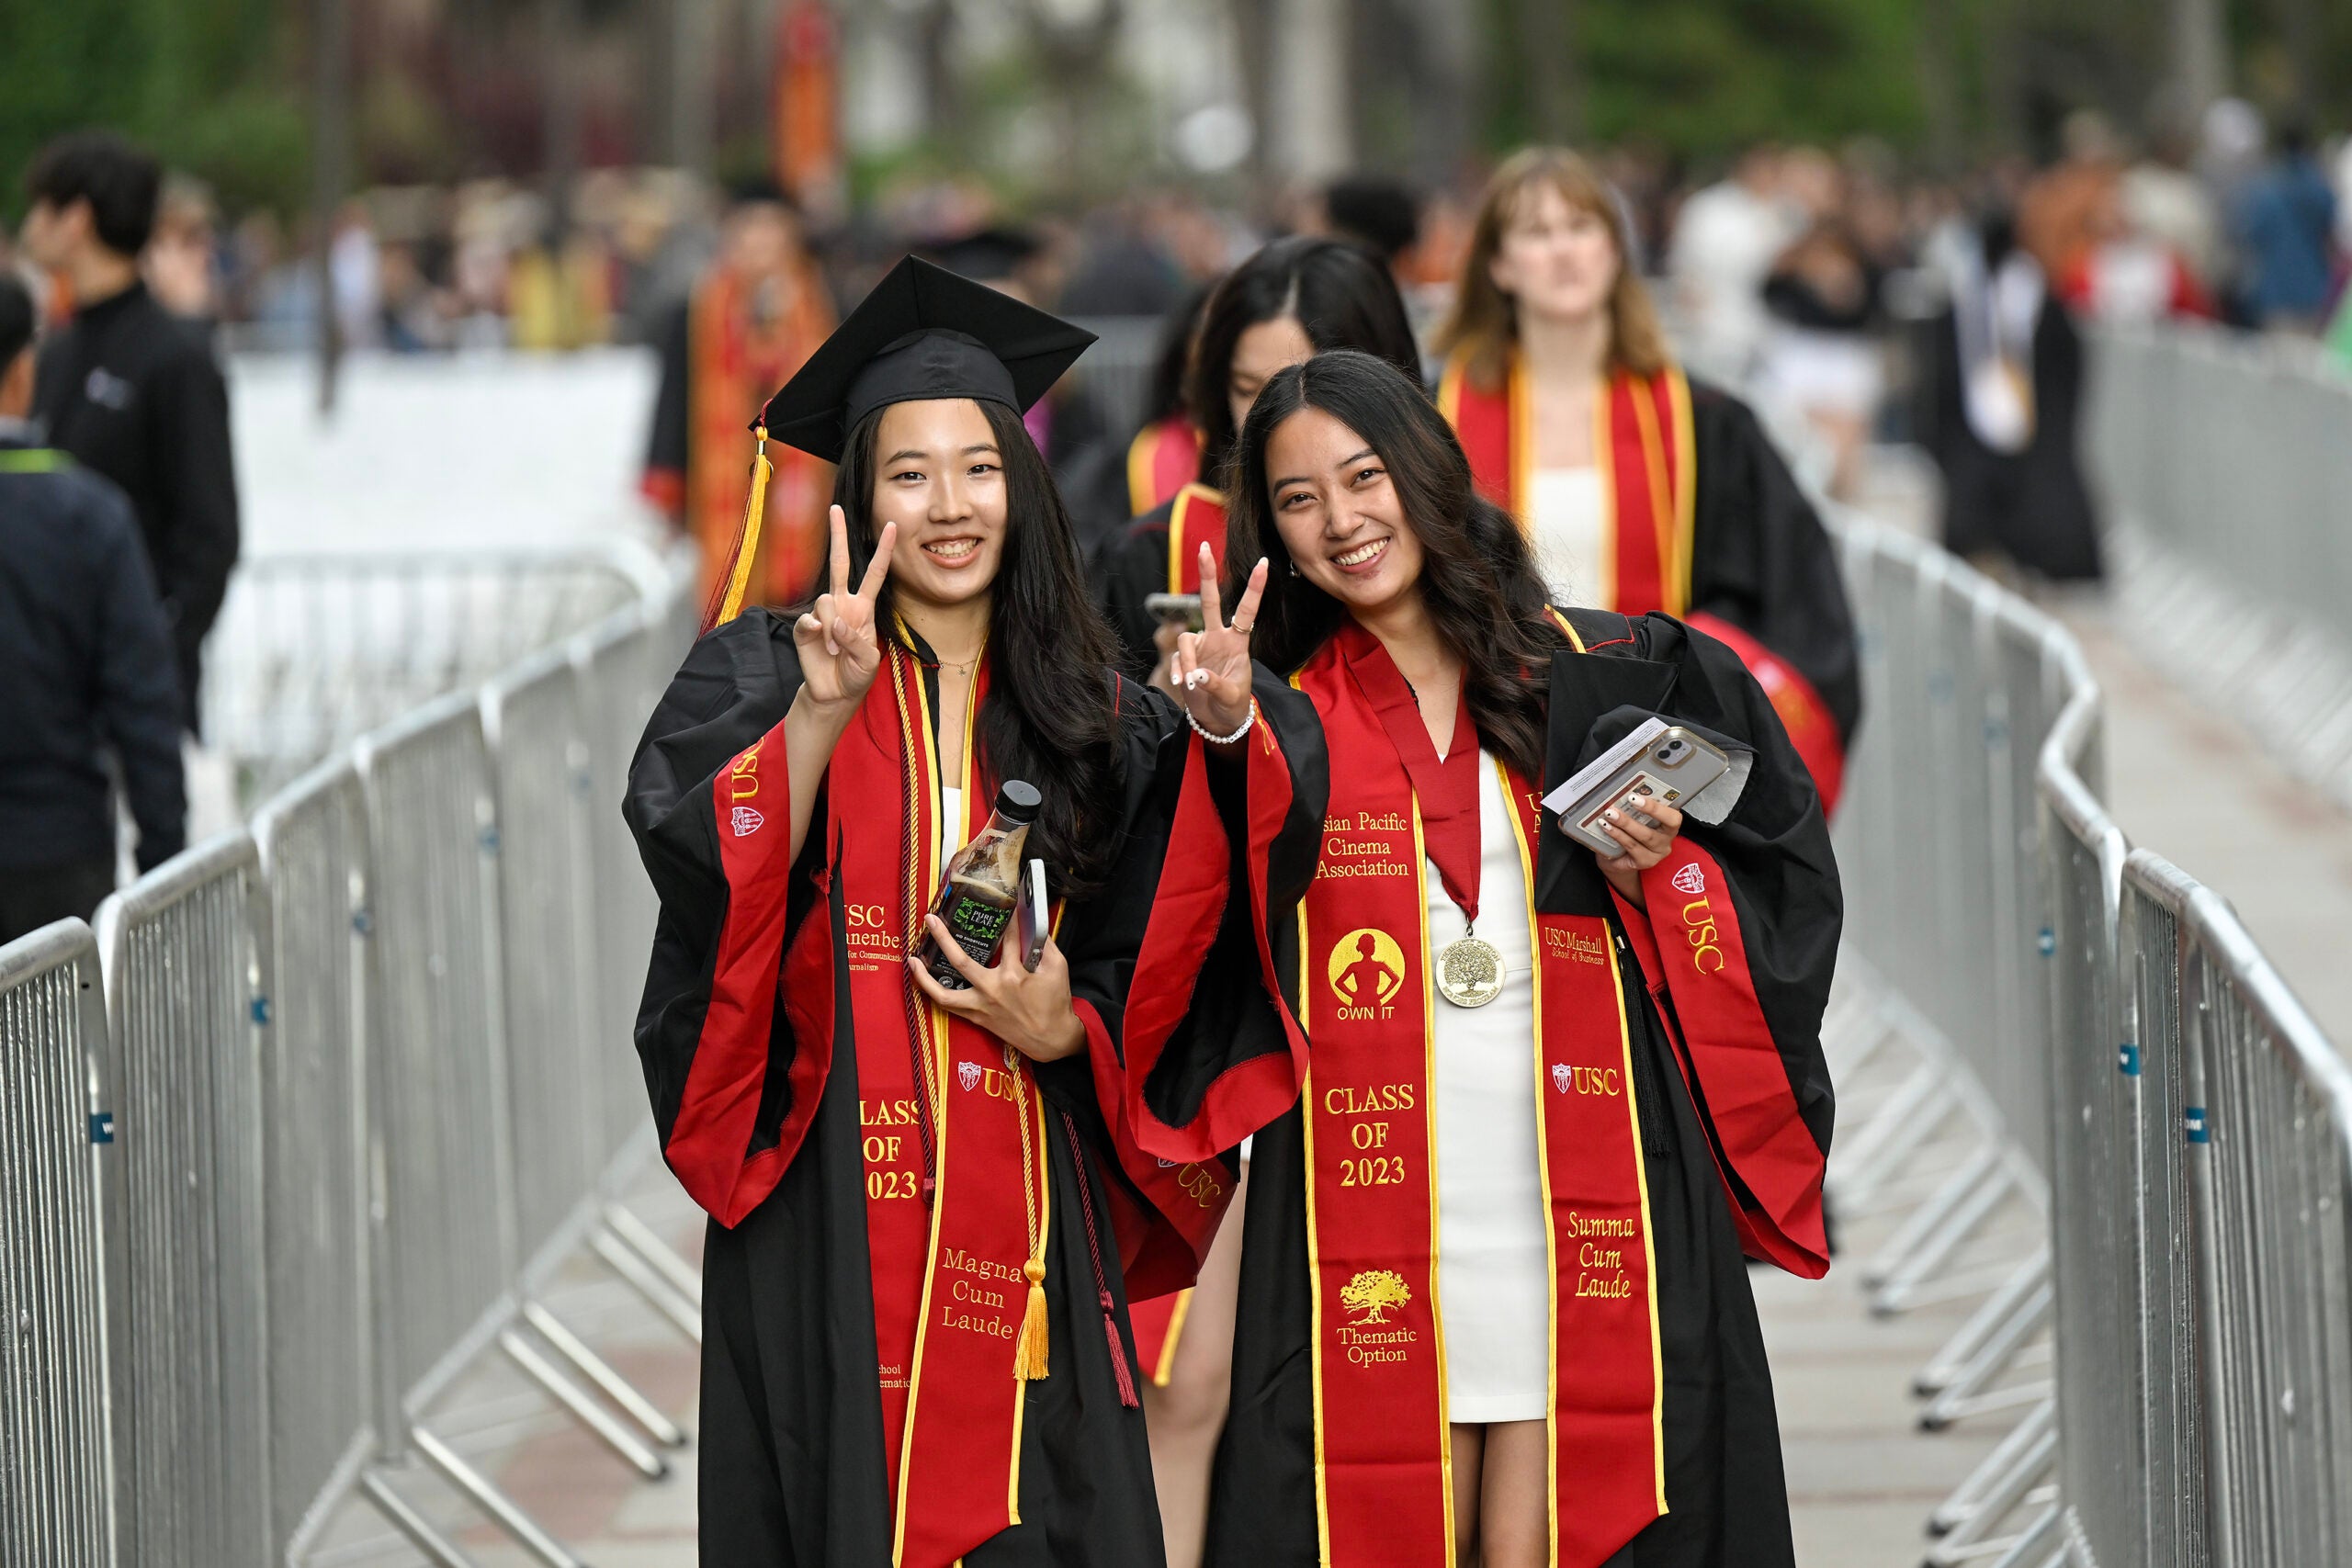 Students prepare for the 140th commencement ceremony at the University of Southern California, May 12, 2023. (Photo/Gus Ruelas)